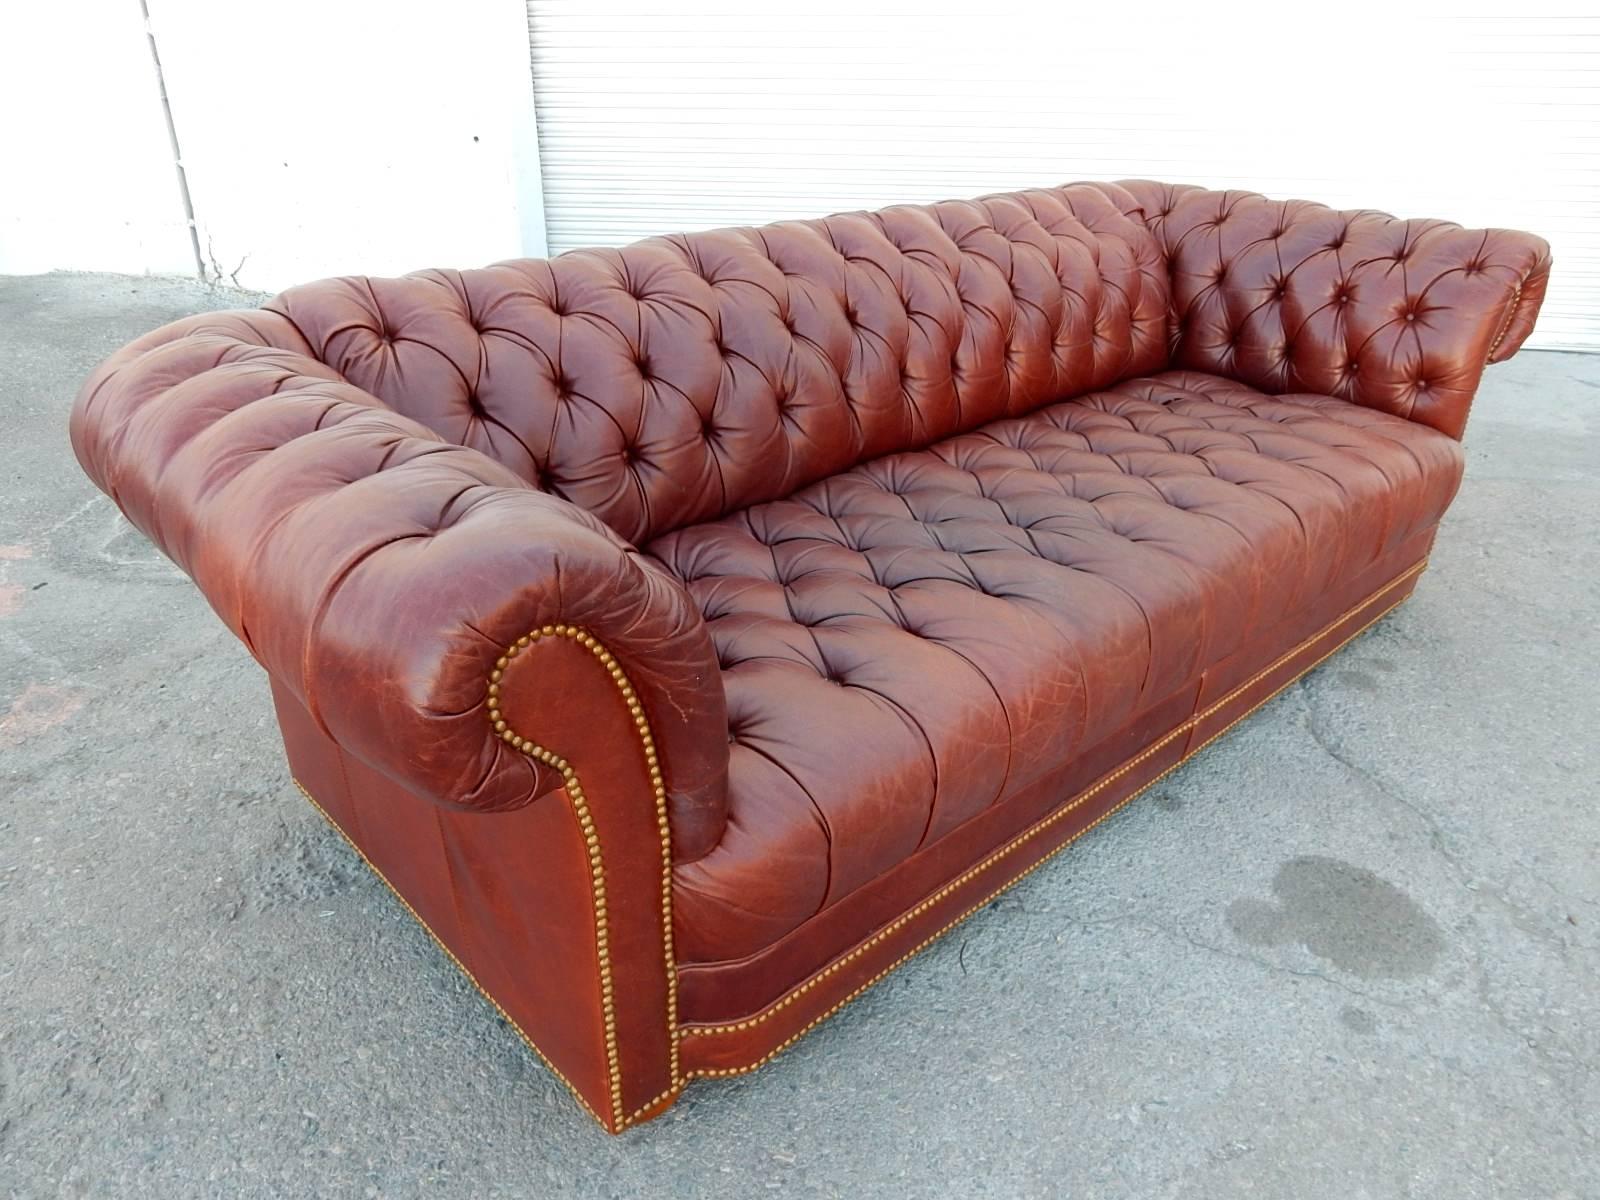 Gorgeous distressed leather Chesterfield sofa in oxblood color with brass tack trim.
Worn to perfection with subtle grain and patina. 
Soft and plush with no holes or tears.